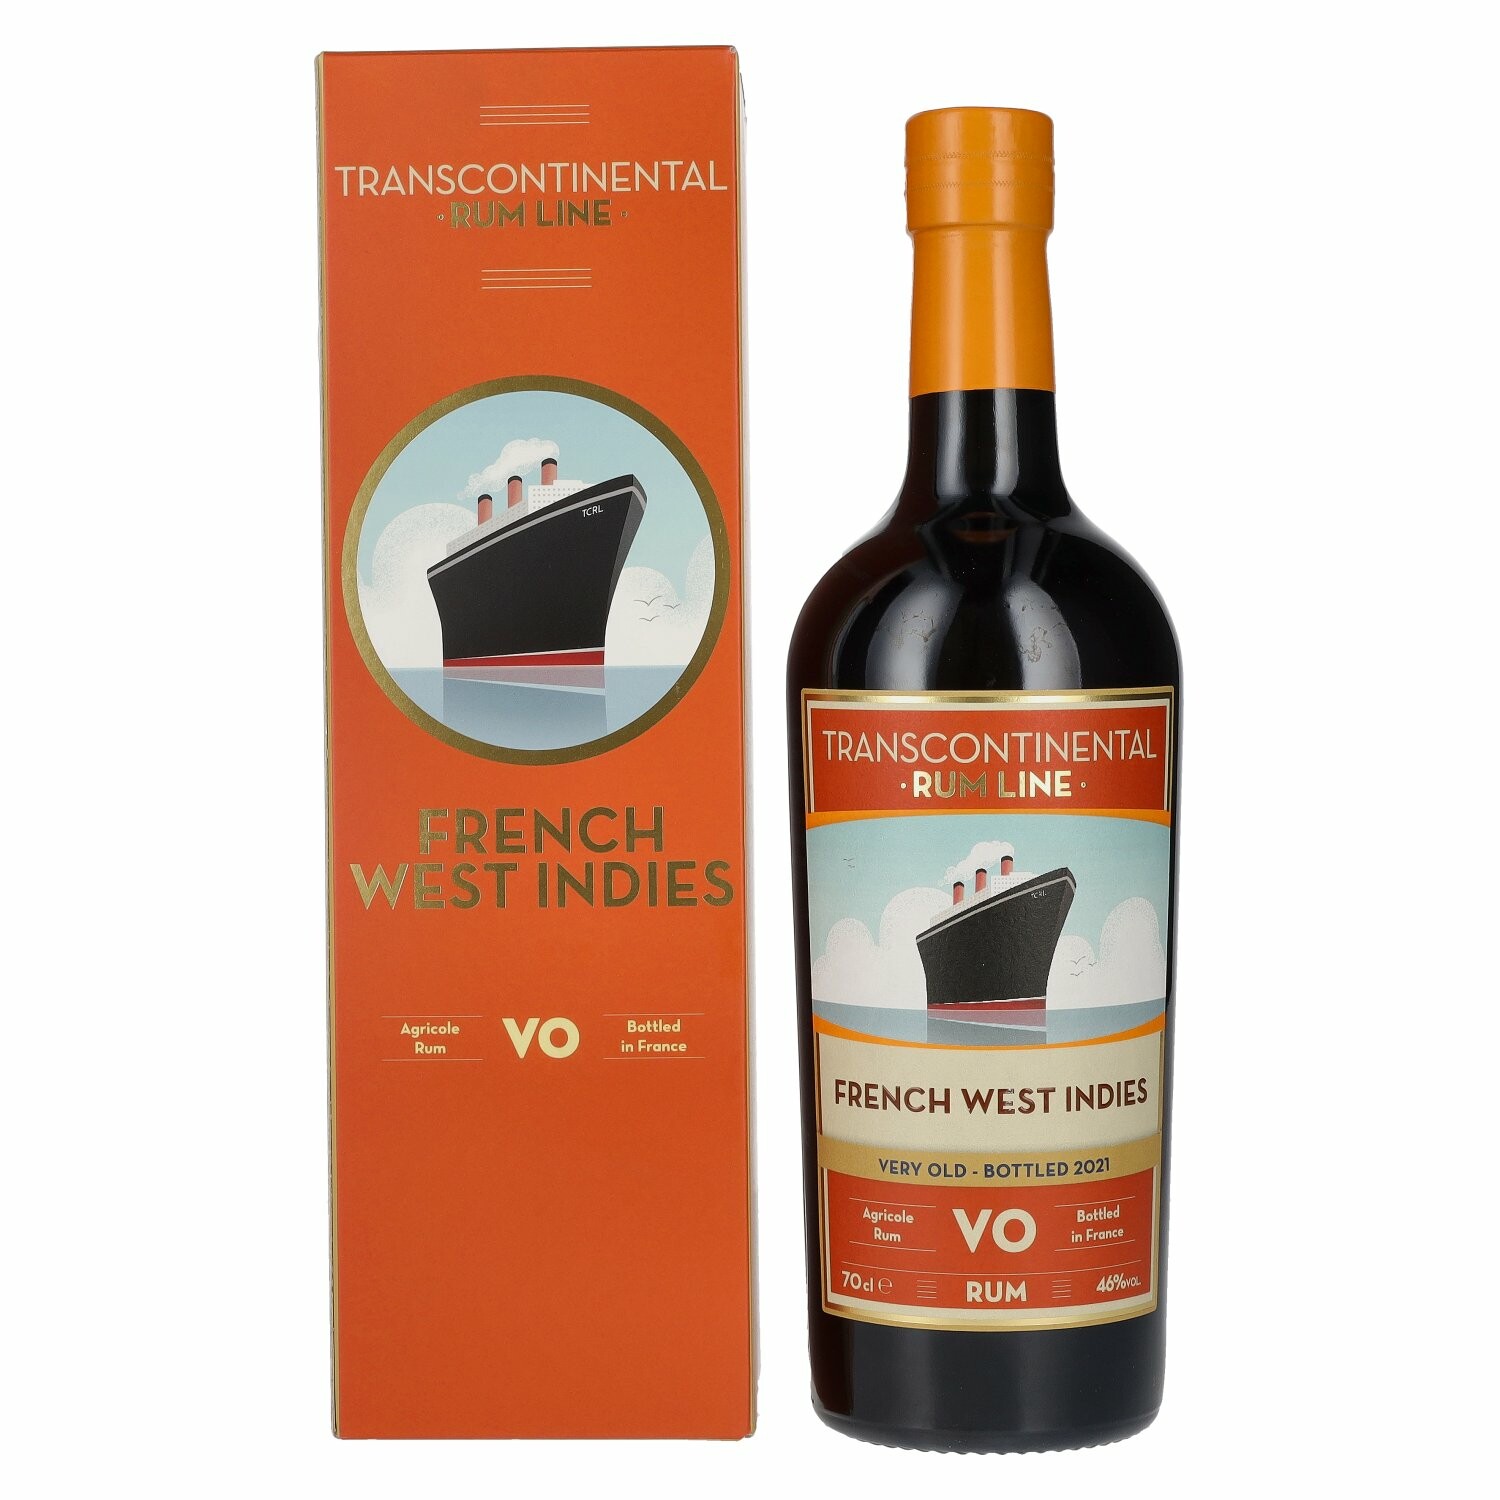 Transcontinental Rum Line FRENCH WEST INDIES VO Rum 2021 46% Vol. 0,7l in Giftbox